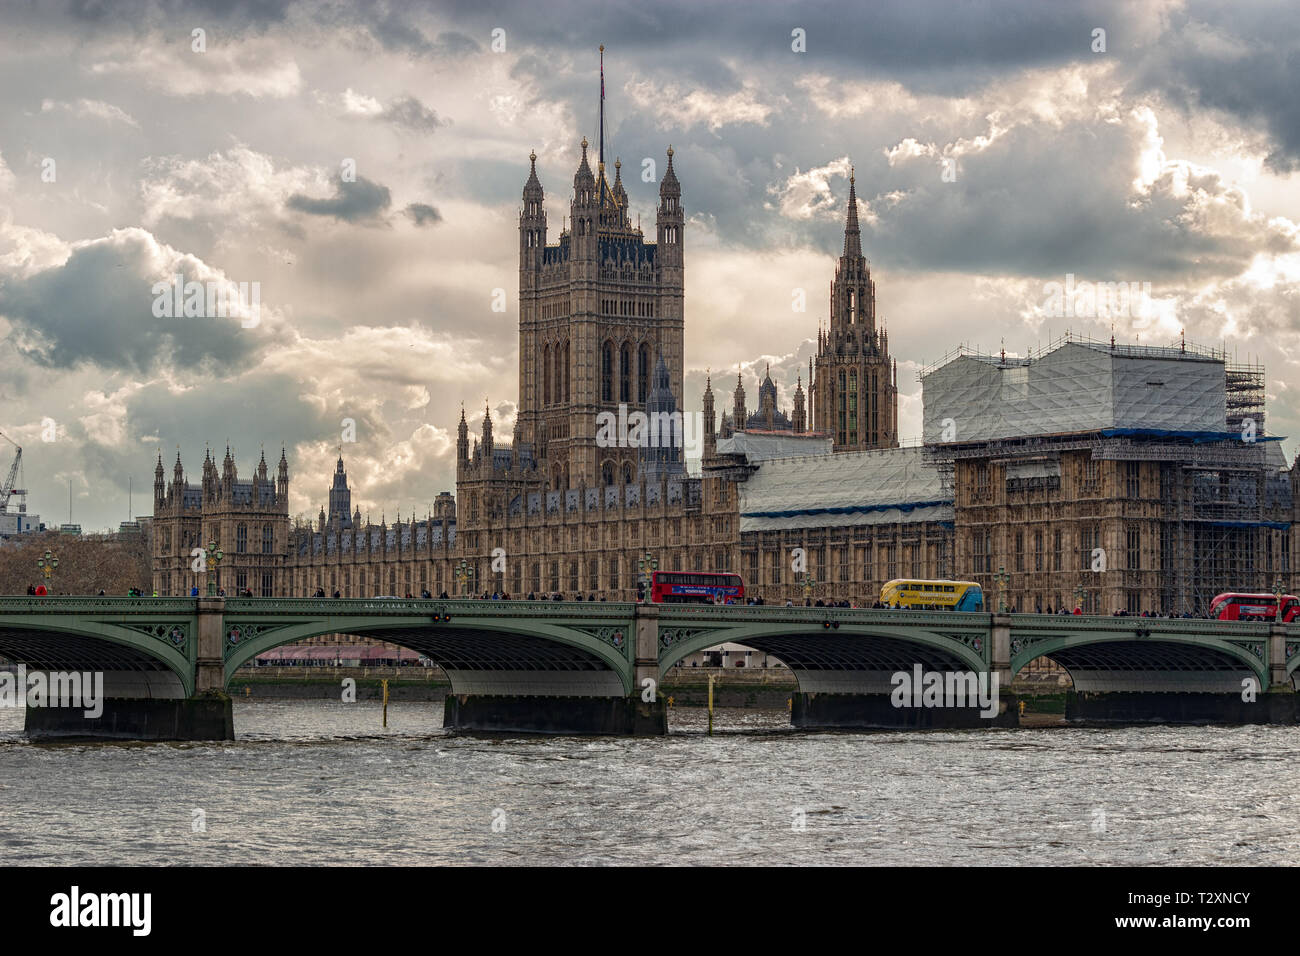 Houses Of Parliament, Westminster, London, England. April 3 2019. The famous historic building shot from the South Bank across the River Thames under Stock Photo